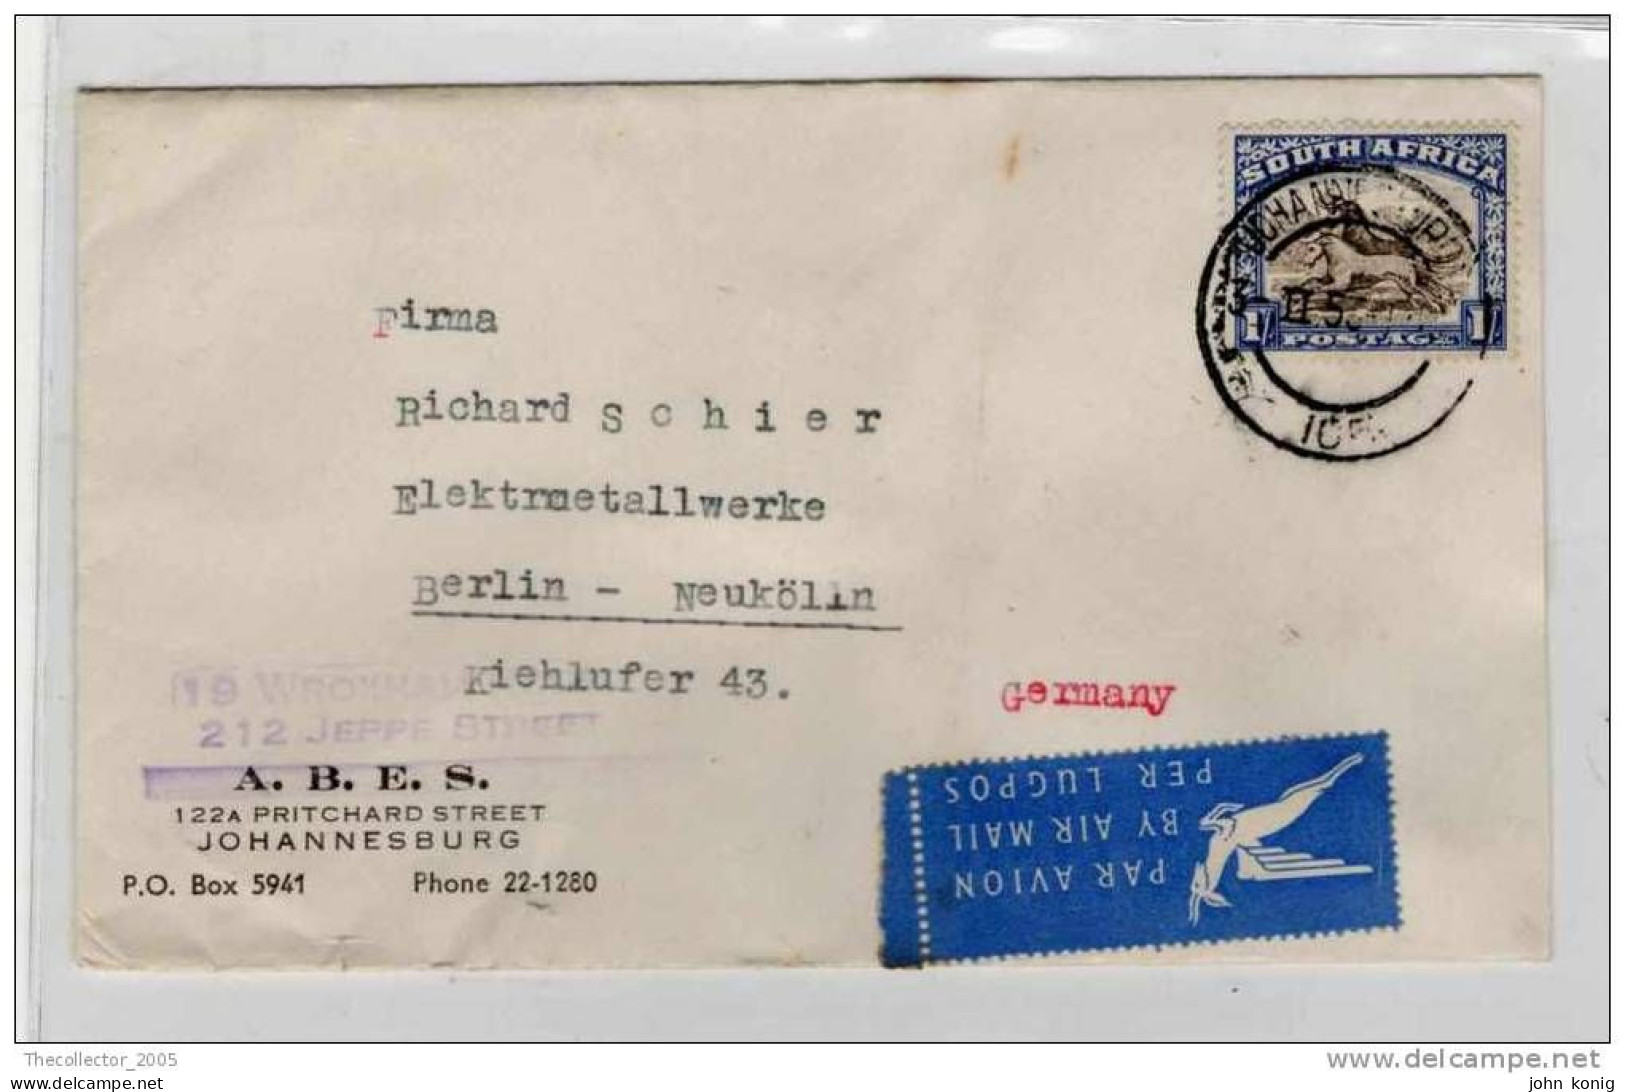 Sudafrica - South Africa - Lettera Busta Letter Cover Briefe - From South Africa To Germany (anni '50 - From'50s) - FDC